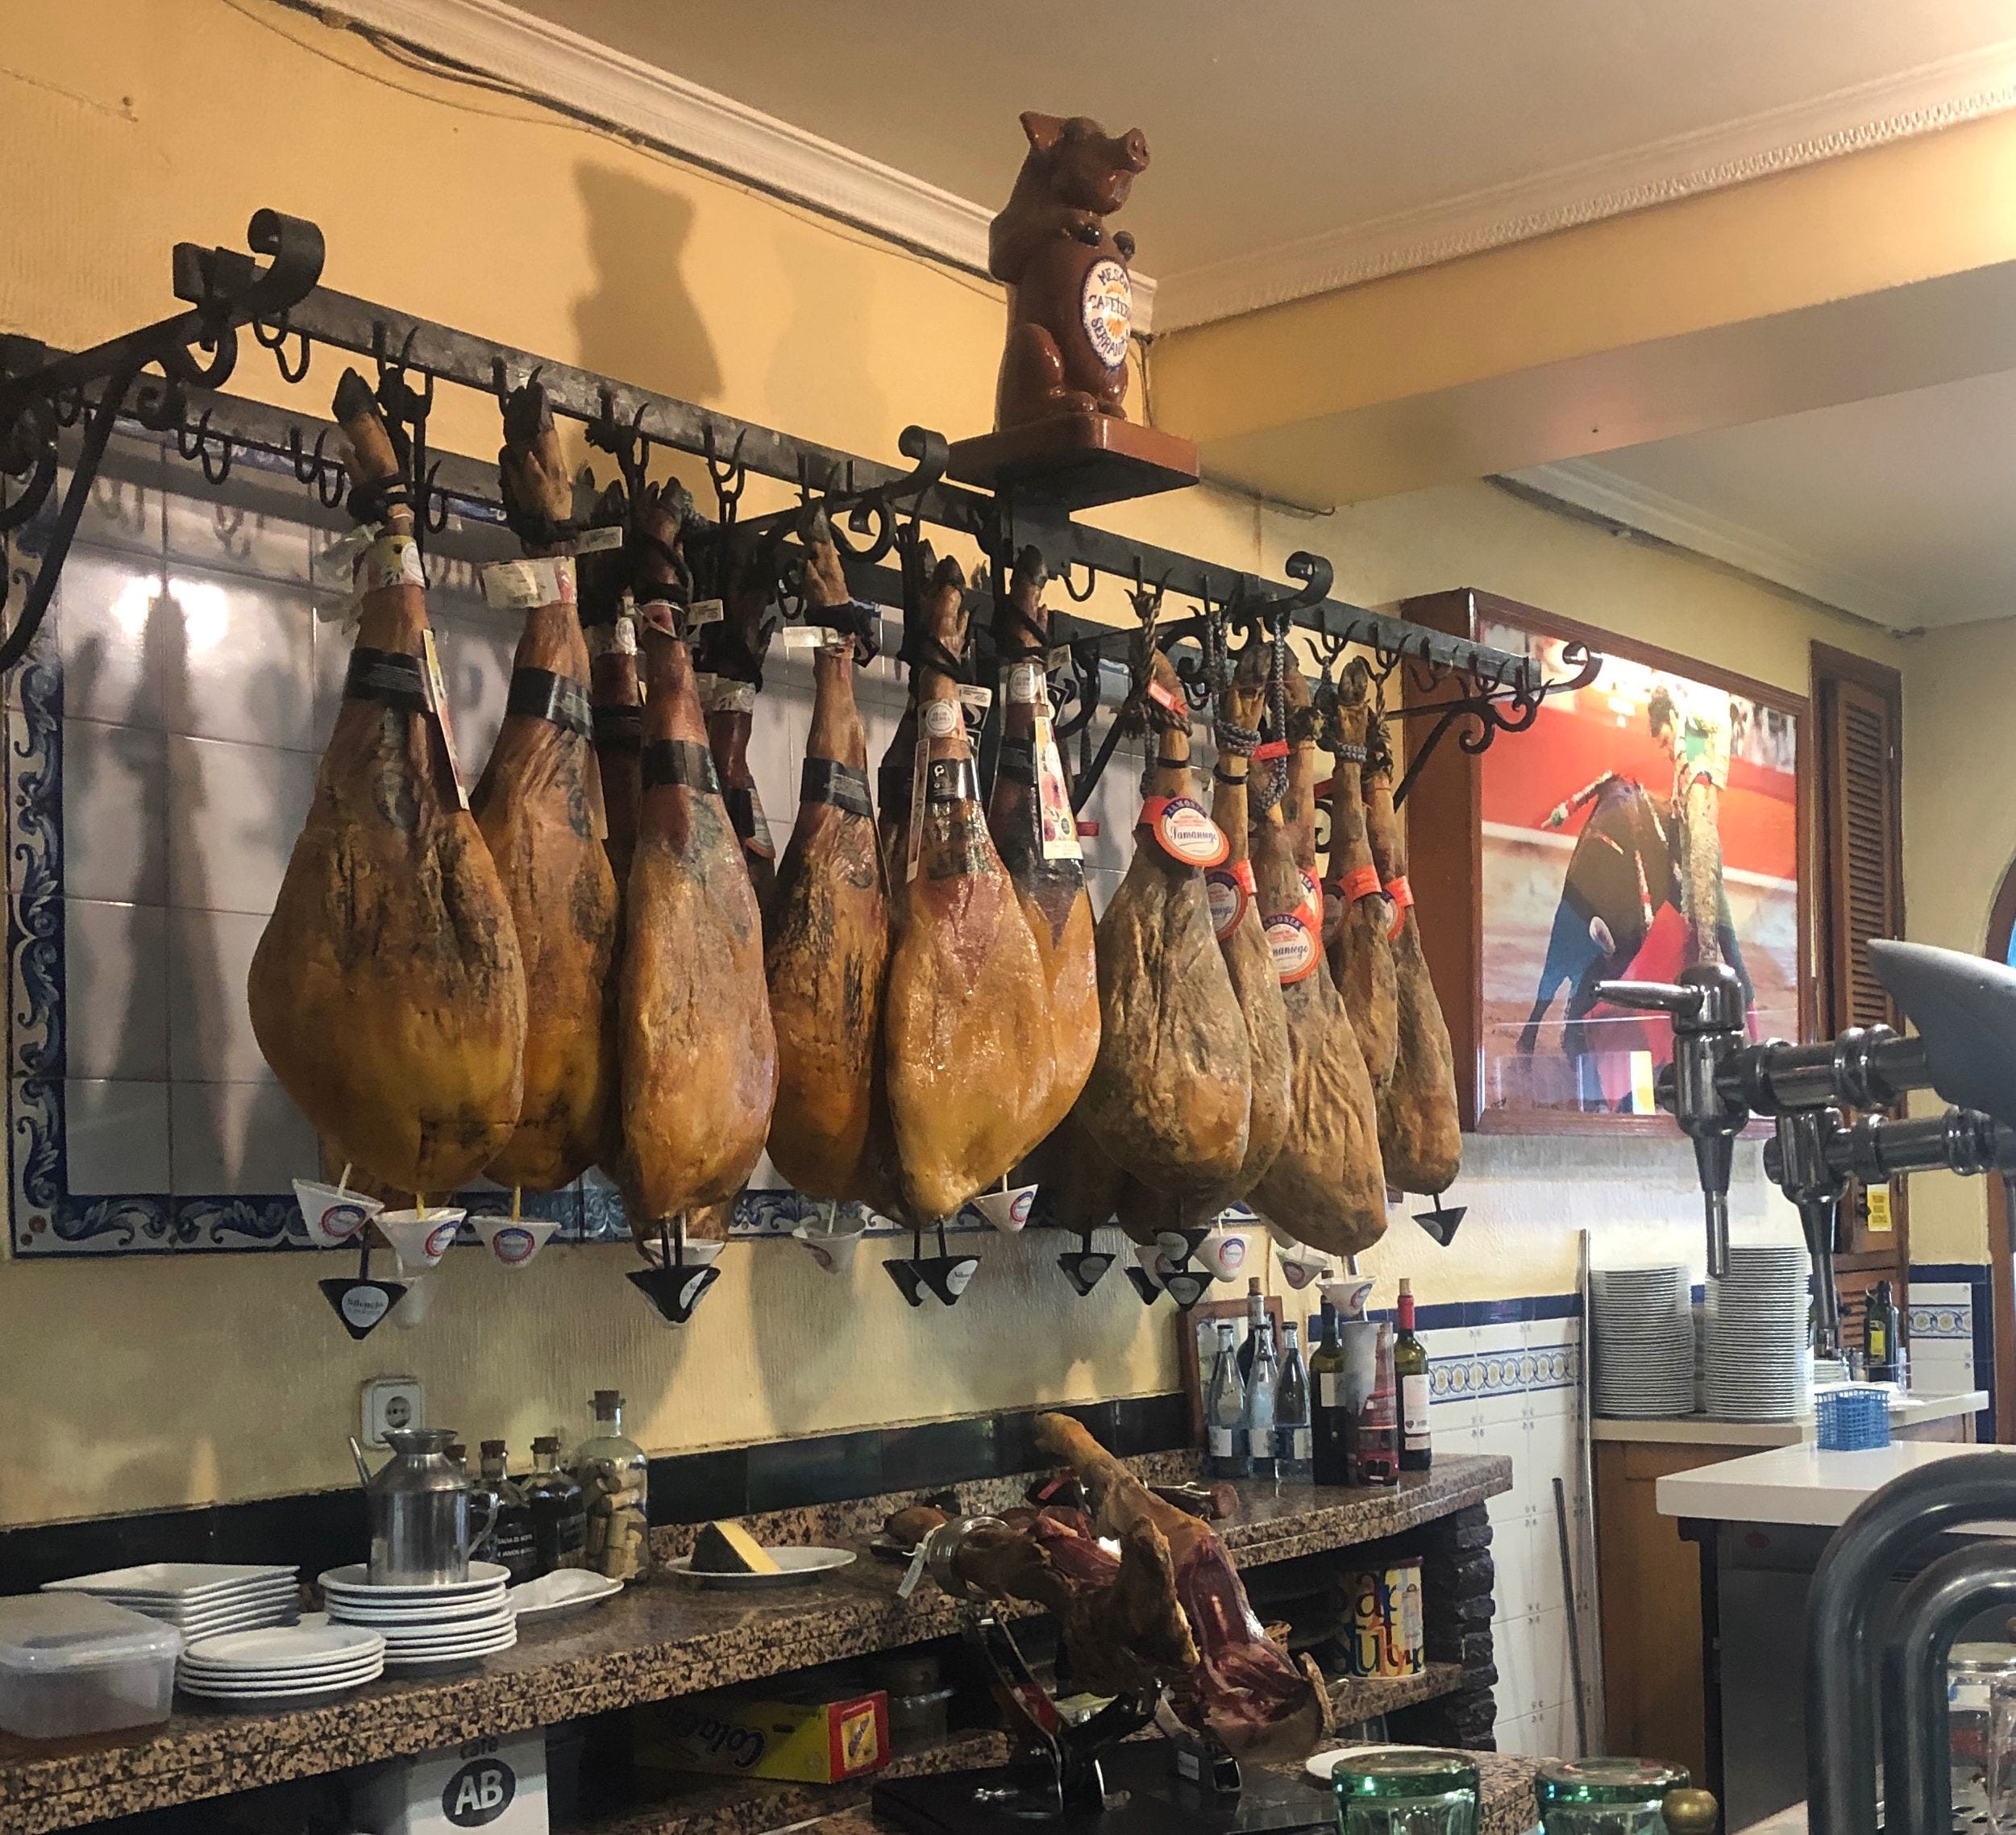 Family Vacation in Spain, Jamon